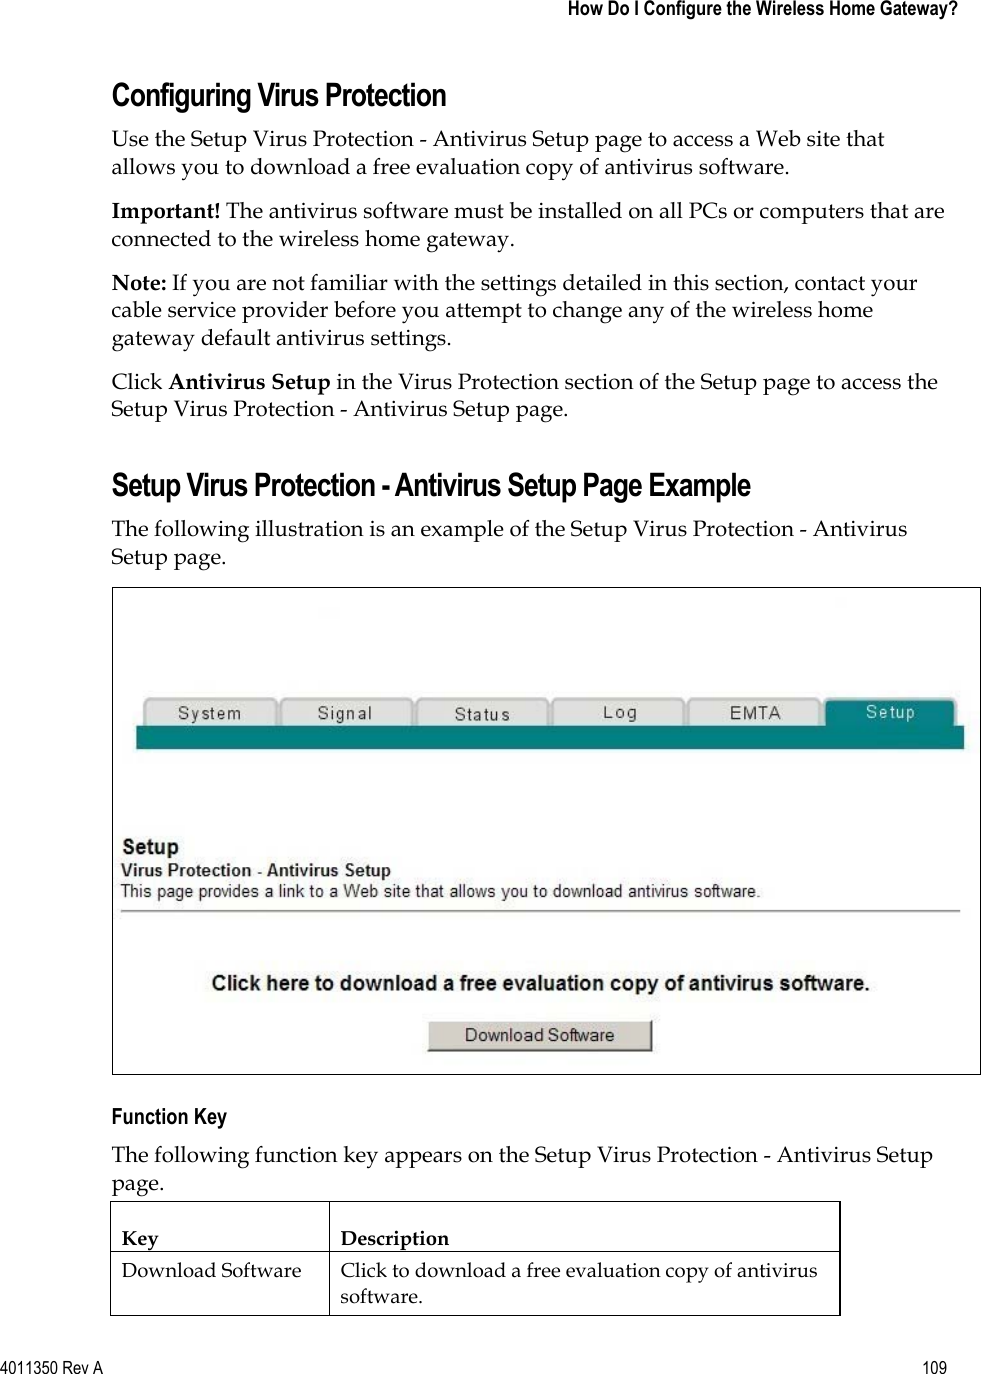 4011350 Rev A    109   How Do I Configure the Wireless Home Gateway?Configuring Virus Protection Use the Setup Virus Protection - Antivirus Setup page to access a Web site that allows you to download a free evaluation copy of antivirus software. Important! The antivirus software must be installed on all PCs or computers that are connected to the wireless home gateway. Note: If you are not familiar with the settings detailed in this section, contact your cable service provider before you attempt to change any of the wireless home gateway default antivirus settings. Click Antivirus Setup in the Virus Protection section of the Setup page to access the Setup Virus Protection - Antivirus Setup page. Setup Virus Protection - Antivirus Setup Page Example The following illustration is an example of the Setup Virus Protection - Antivirus Setup page. Function Key The following function key appears on the Setup Virus Protection - Antivirus Setup page.Key Description Download Software  Click to download a free evaluation copy of antivirus software. 